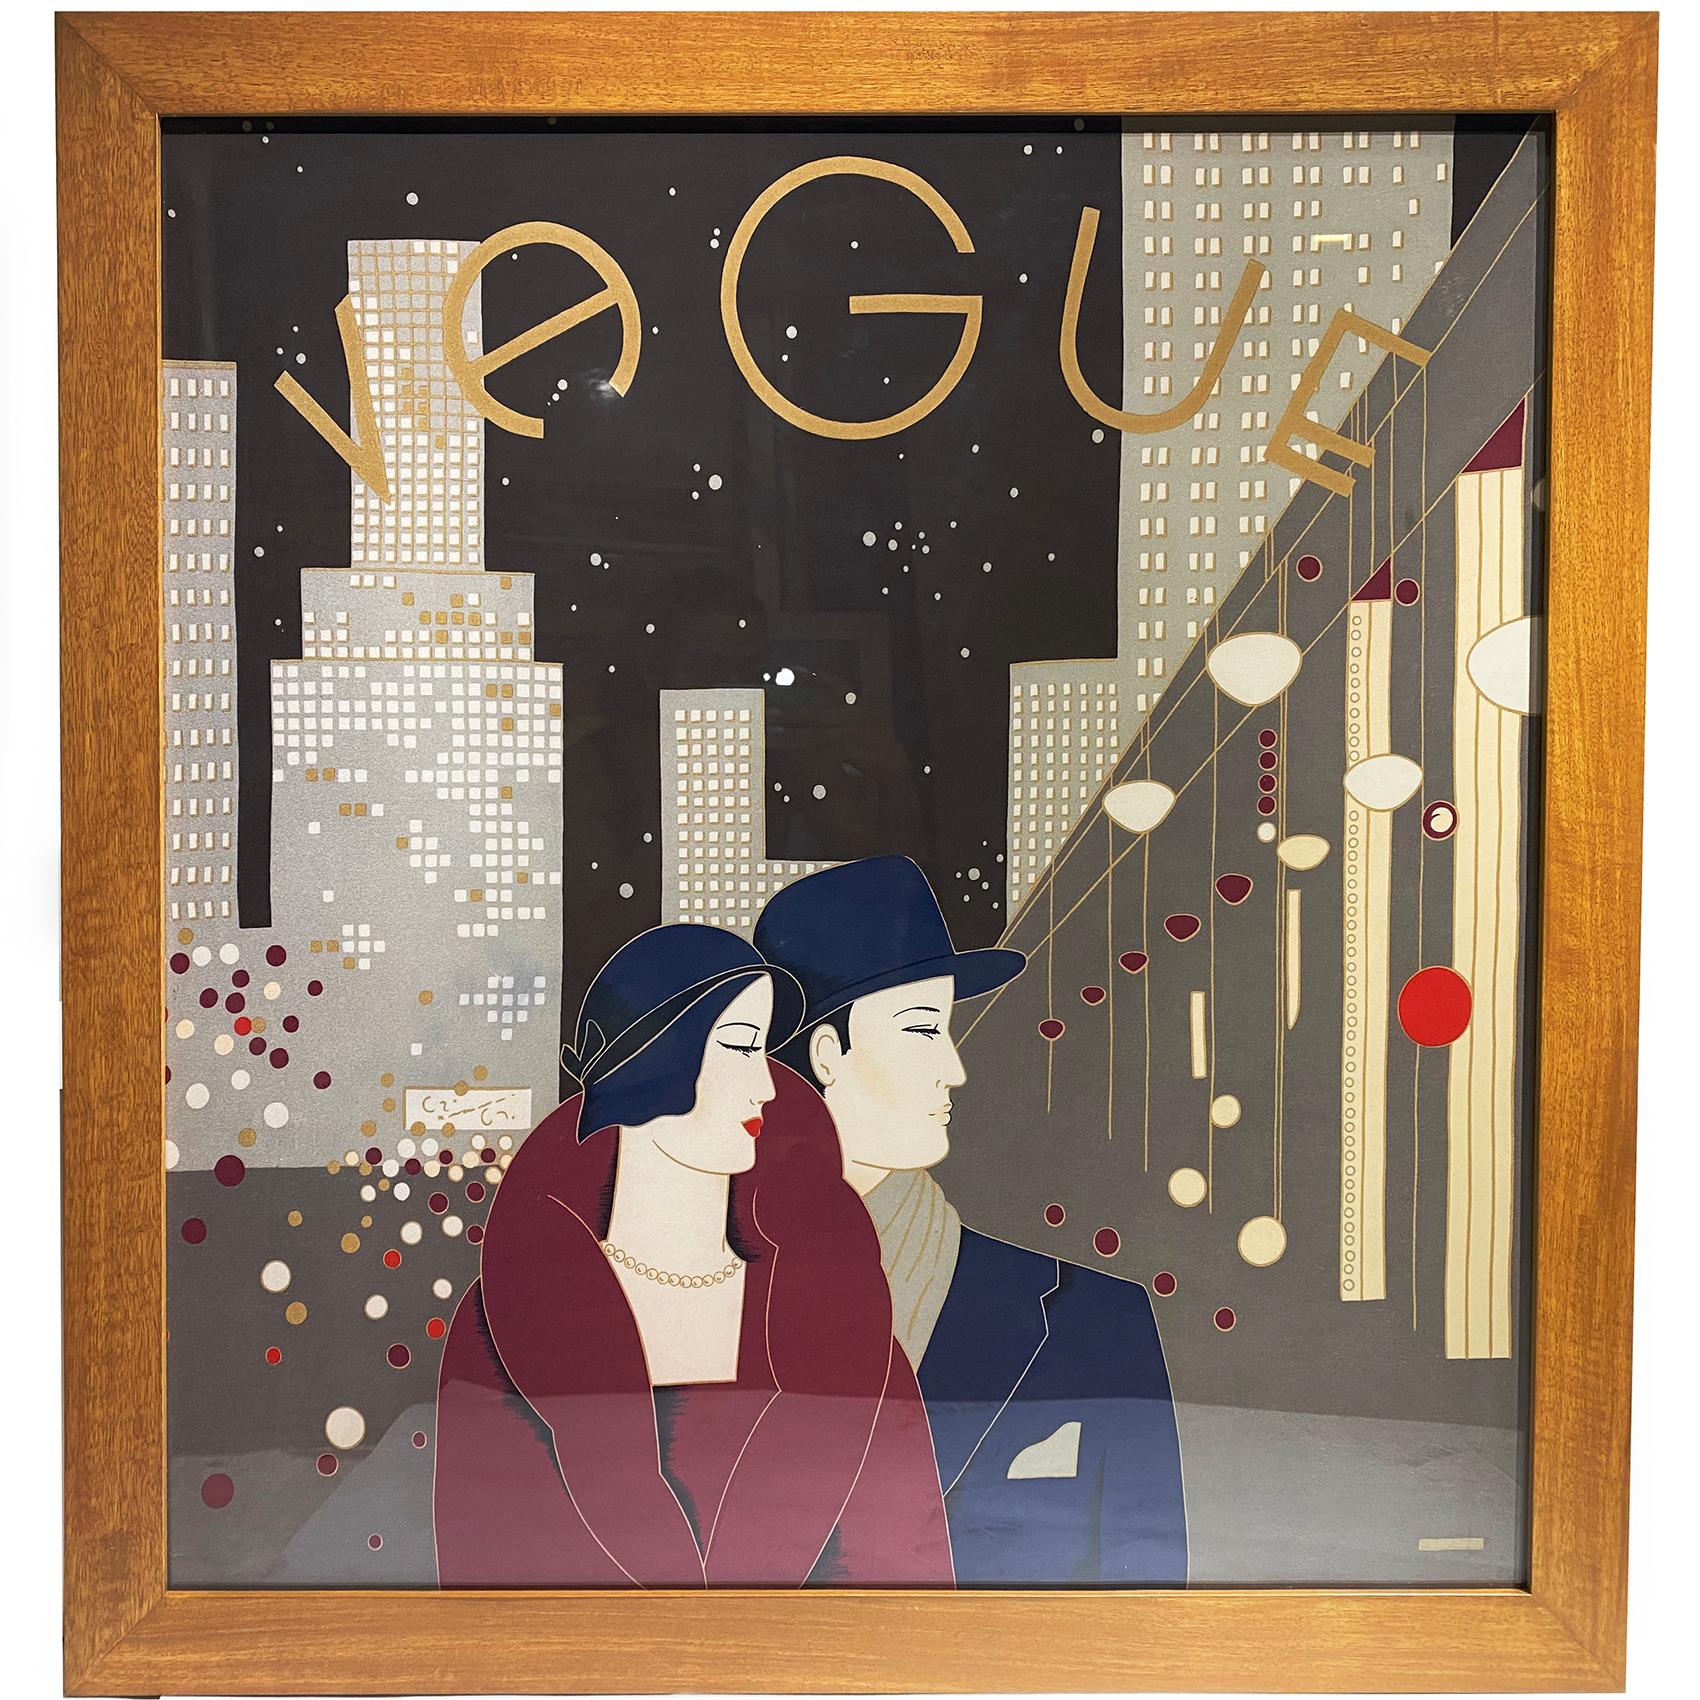 Art Deco style silk scarf by Pancaldi, featuring a women and a man in the city dressed in 1930 style , entitled “VAGUE”
Signed Pancaldi in the bottom left corner.
Covered with plexiglass on the front with the scarf stretched on white Masonite wood.